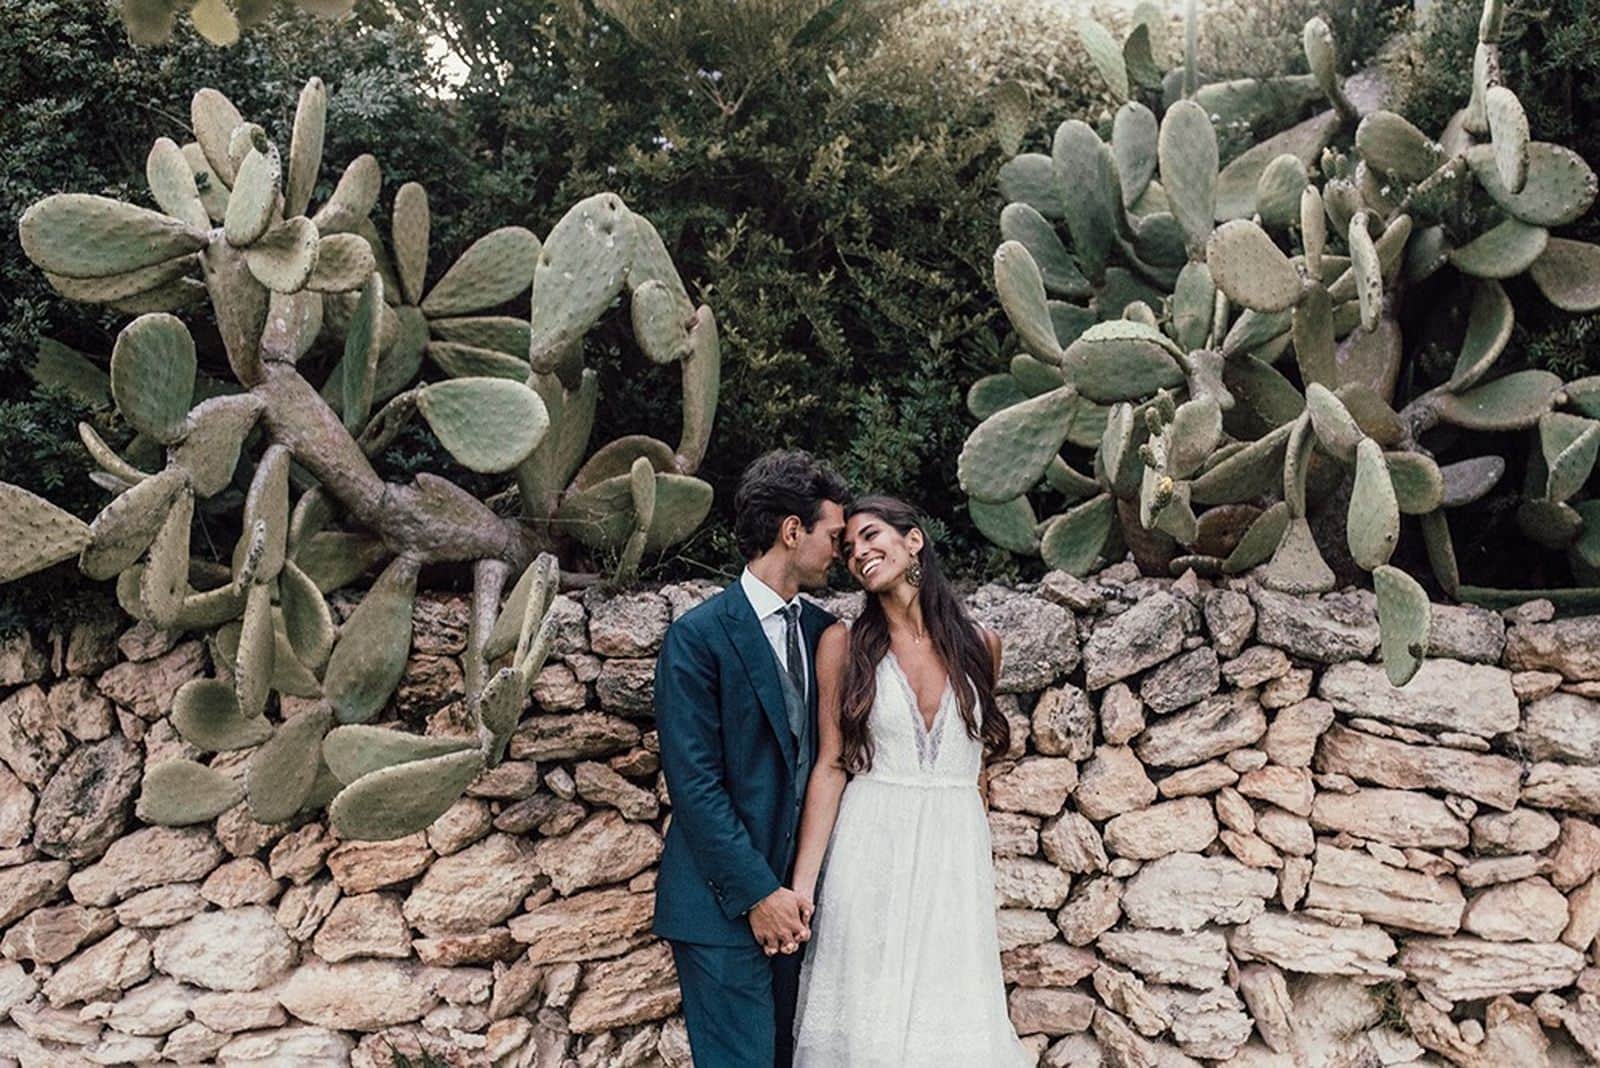 Bride and groom portrait in front of cacti